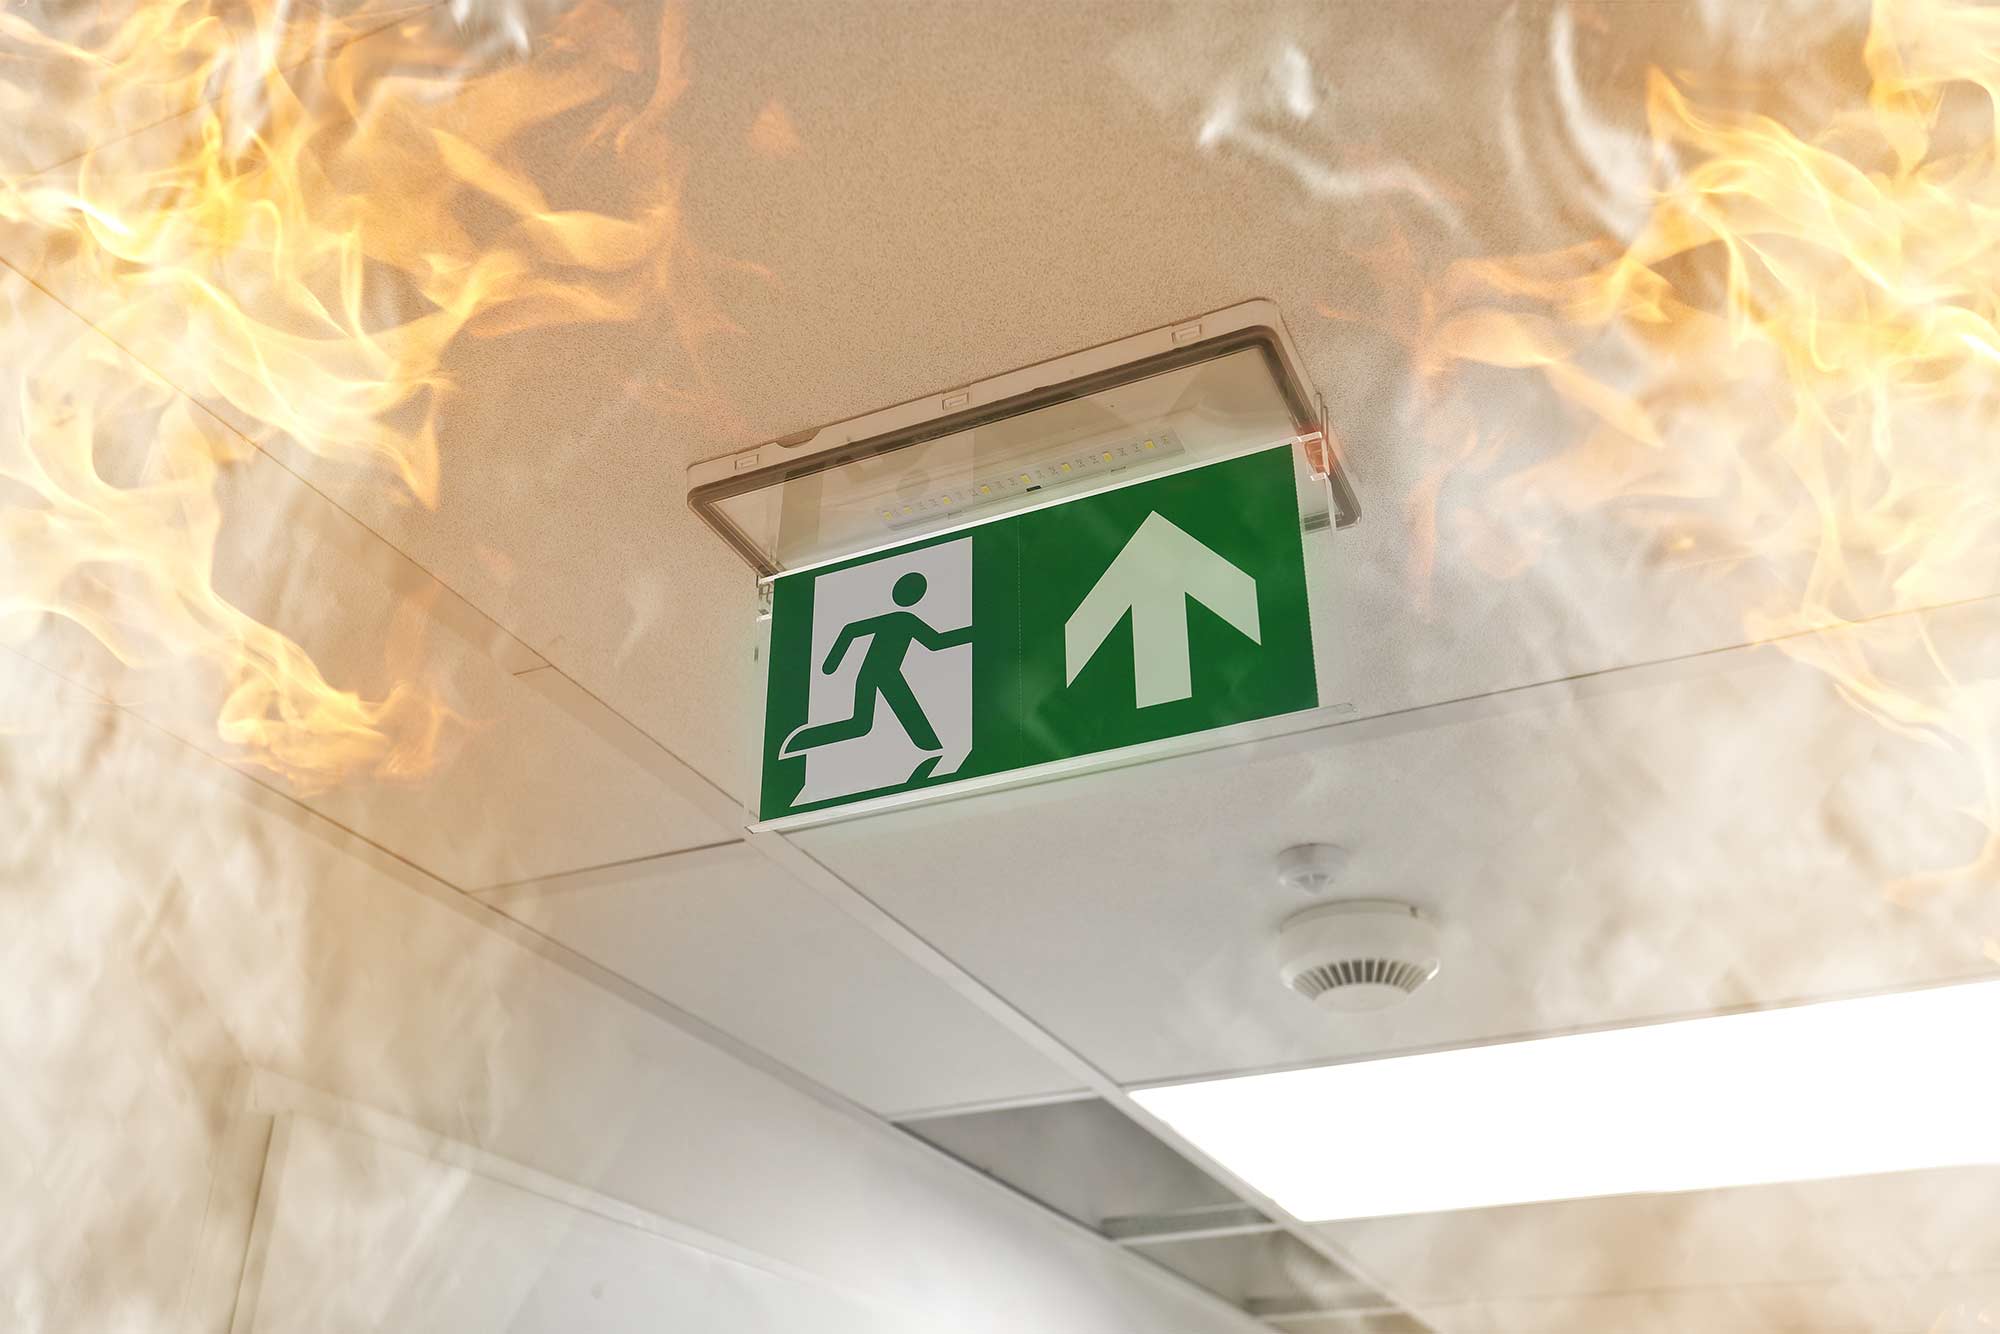 Emergency lighting to assist escape in the event of fire